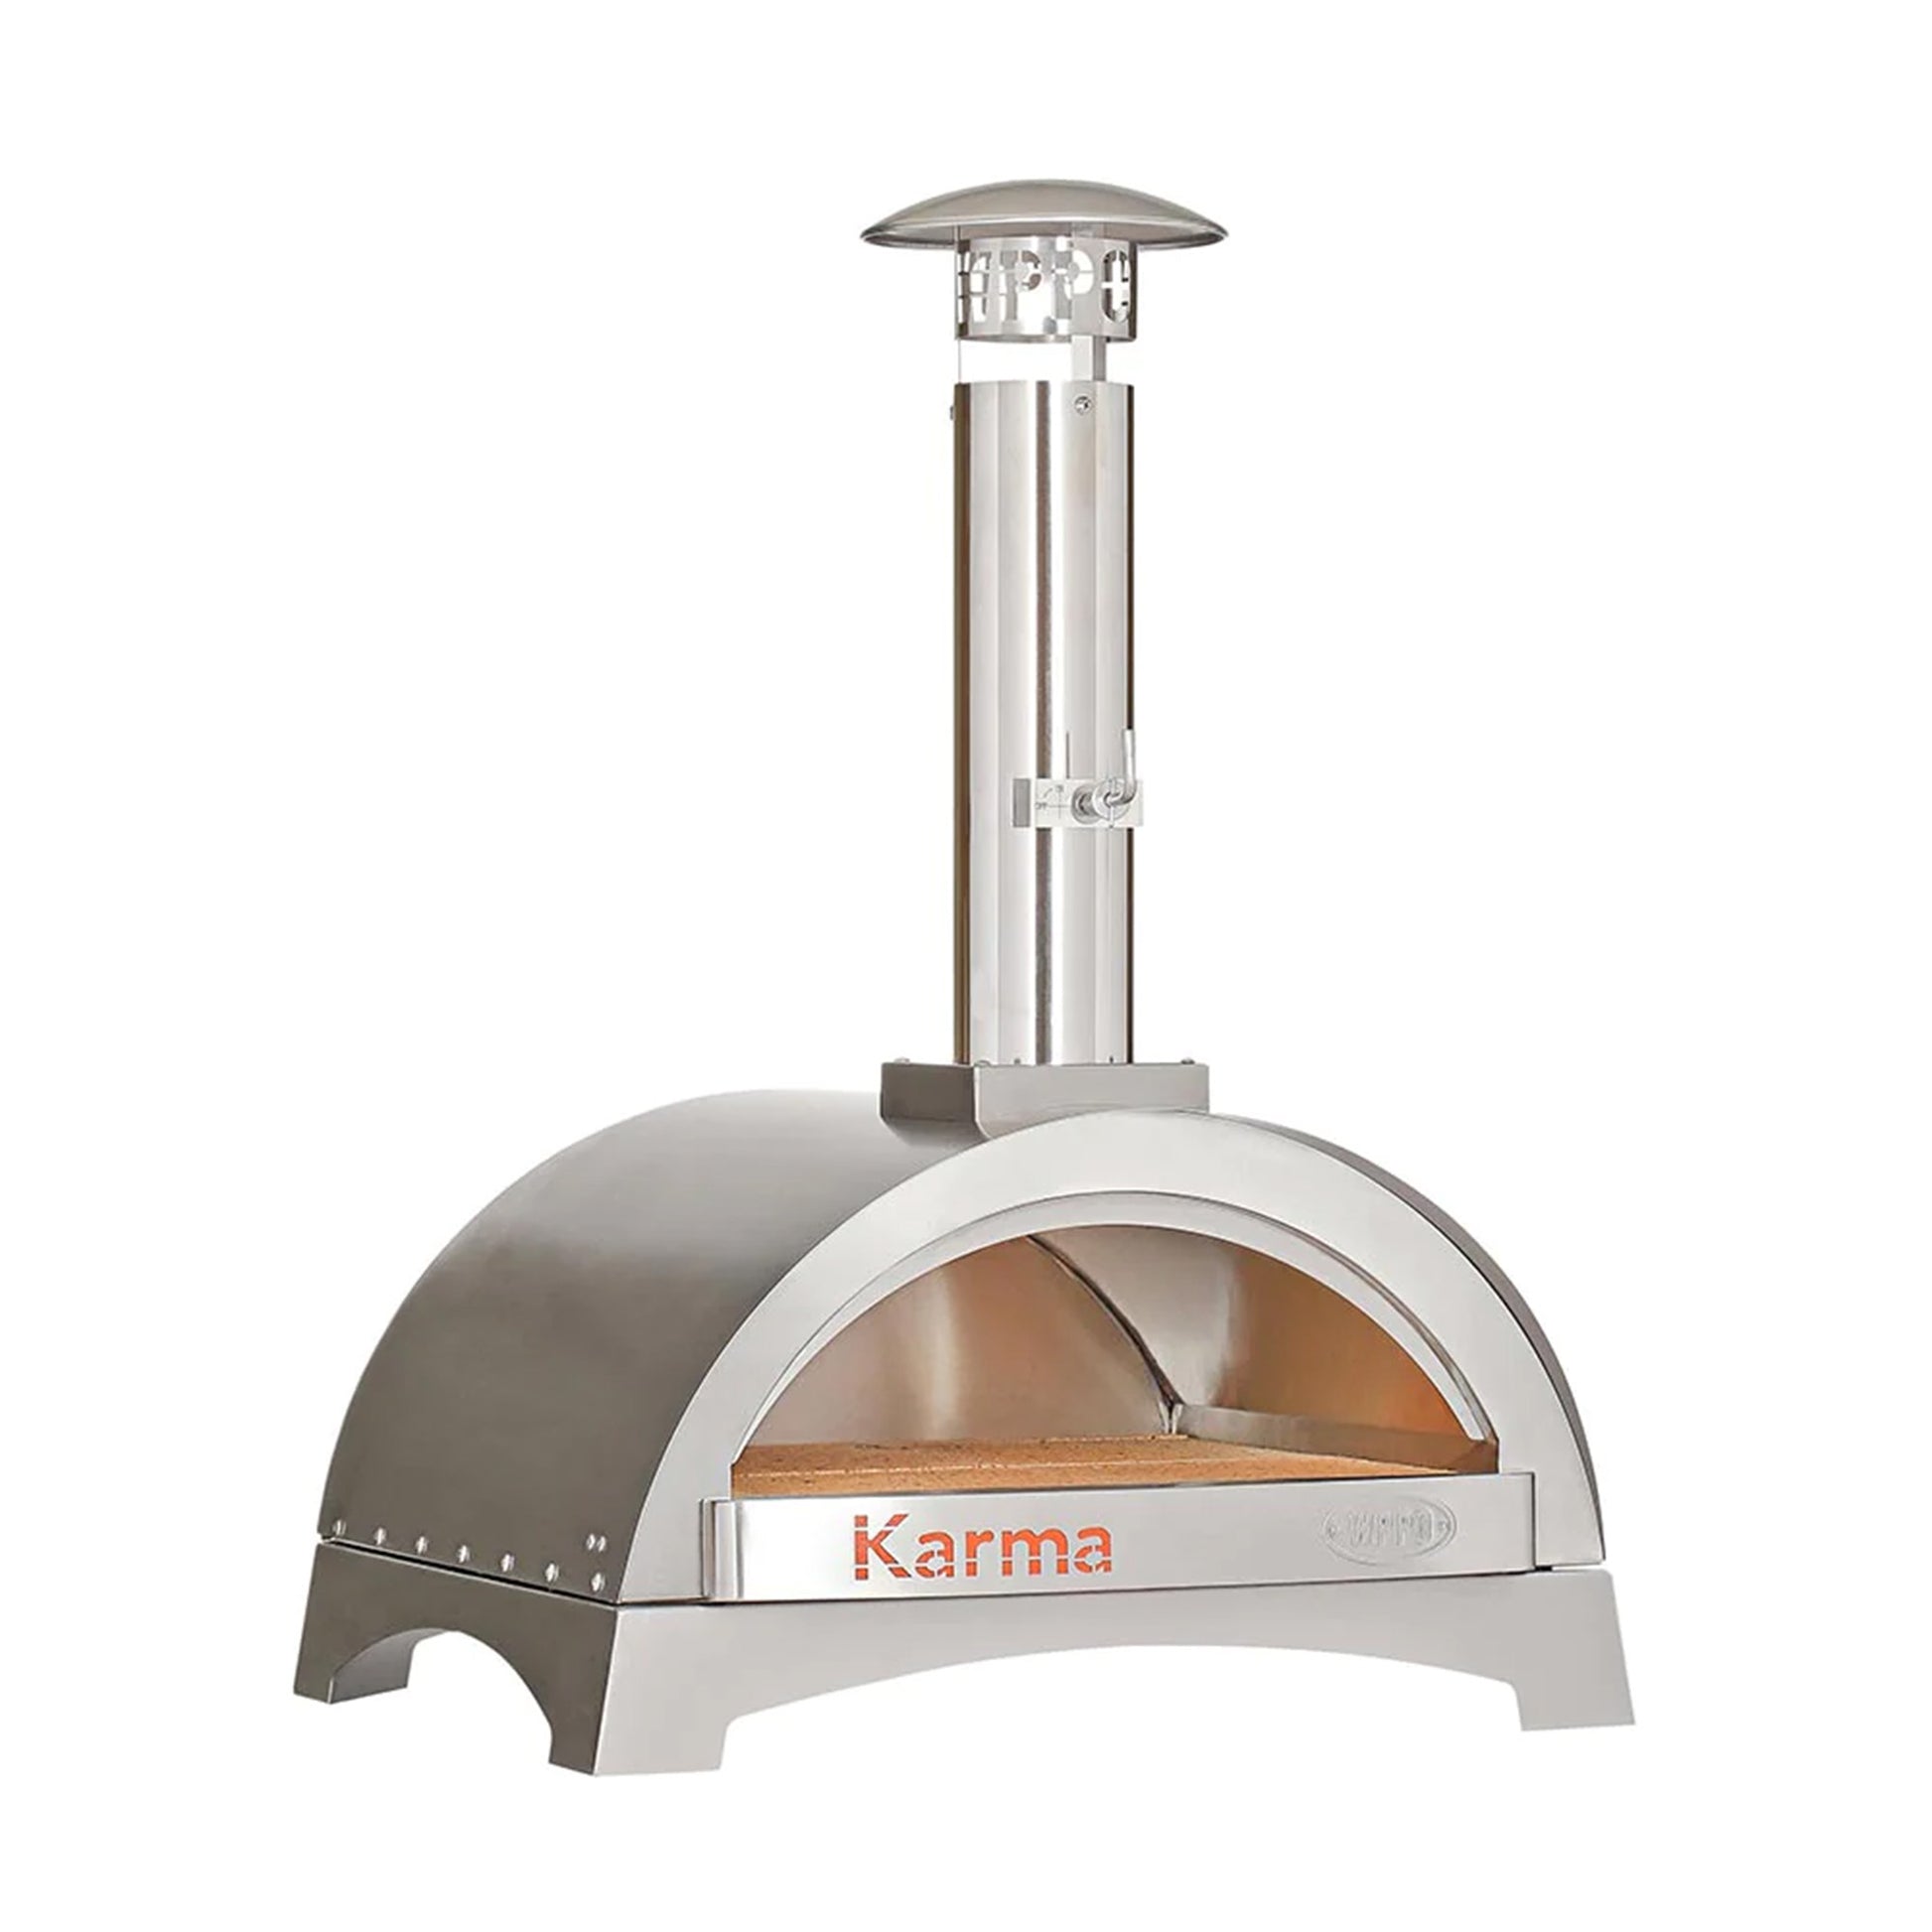 WPPO LLC Karma 25 Pizza Oven (with Base)